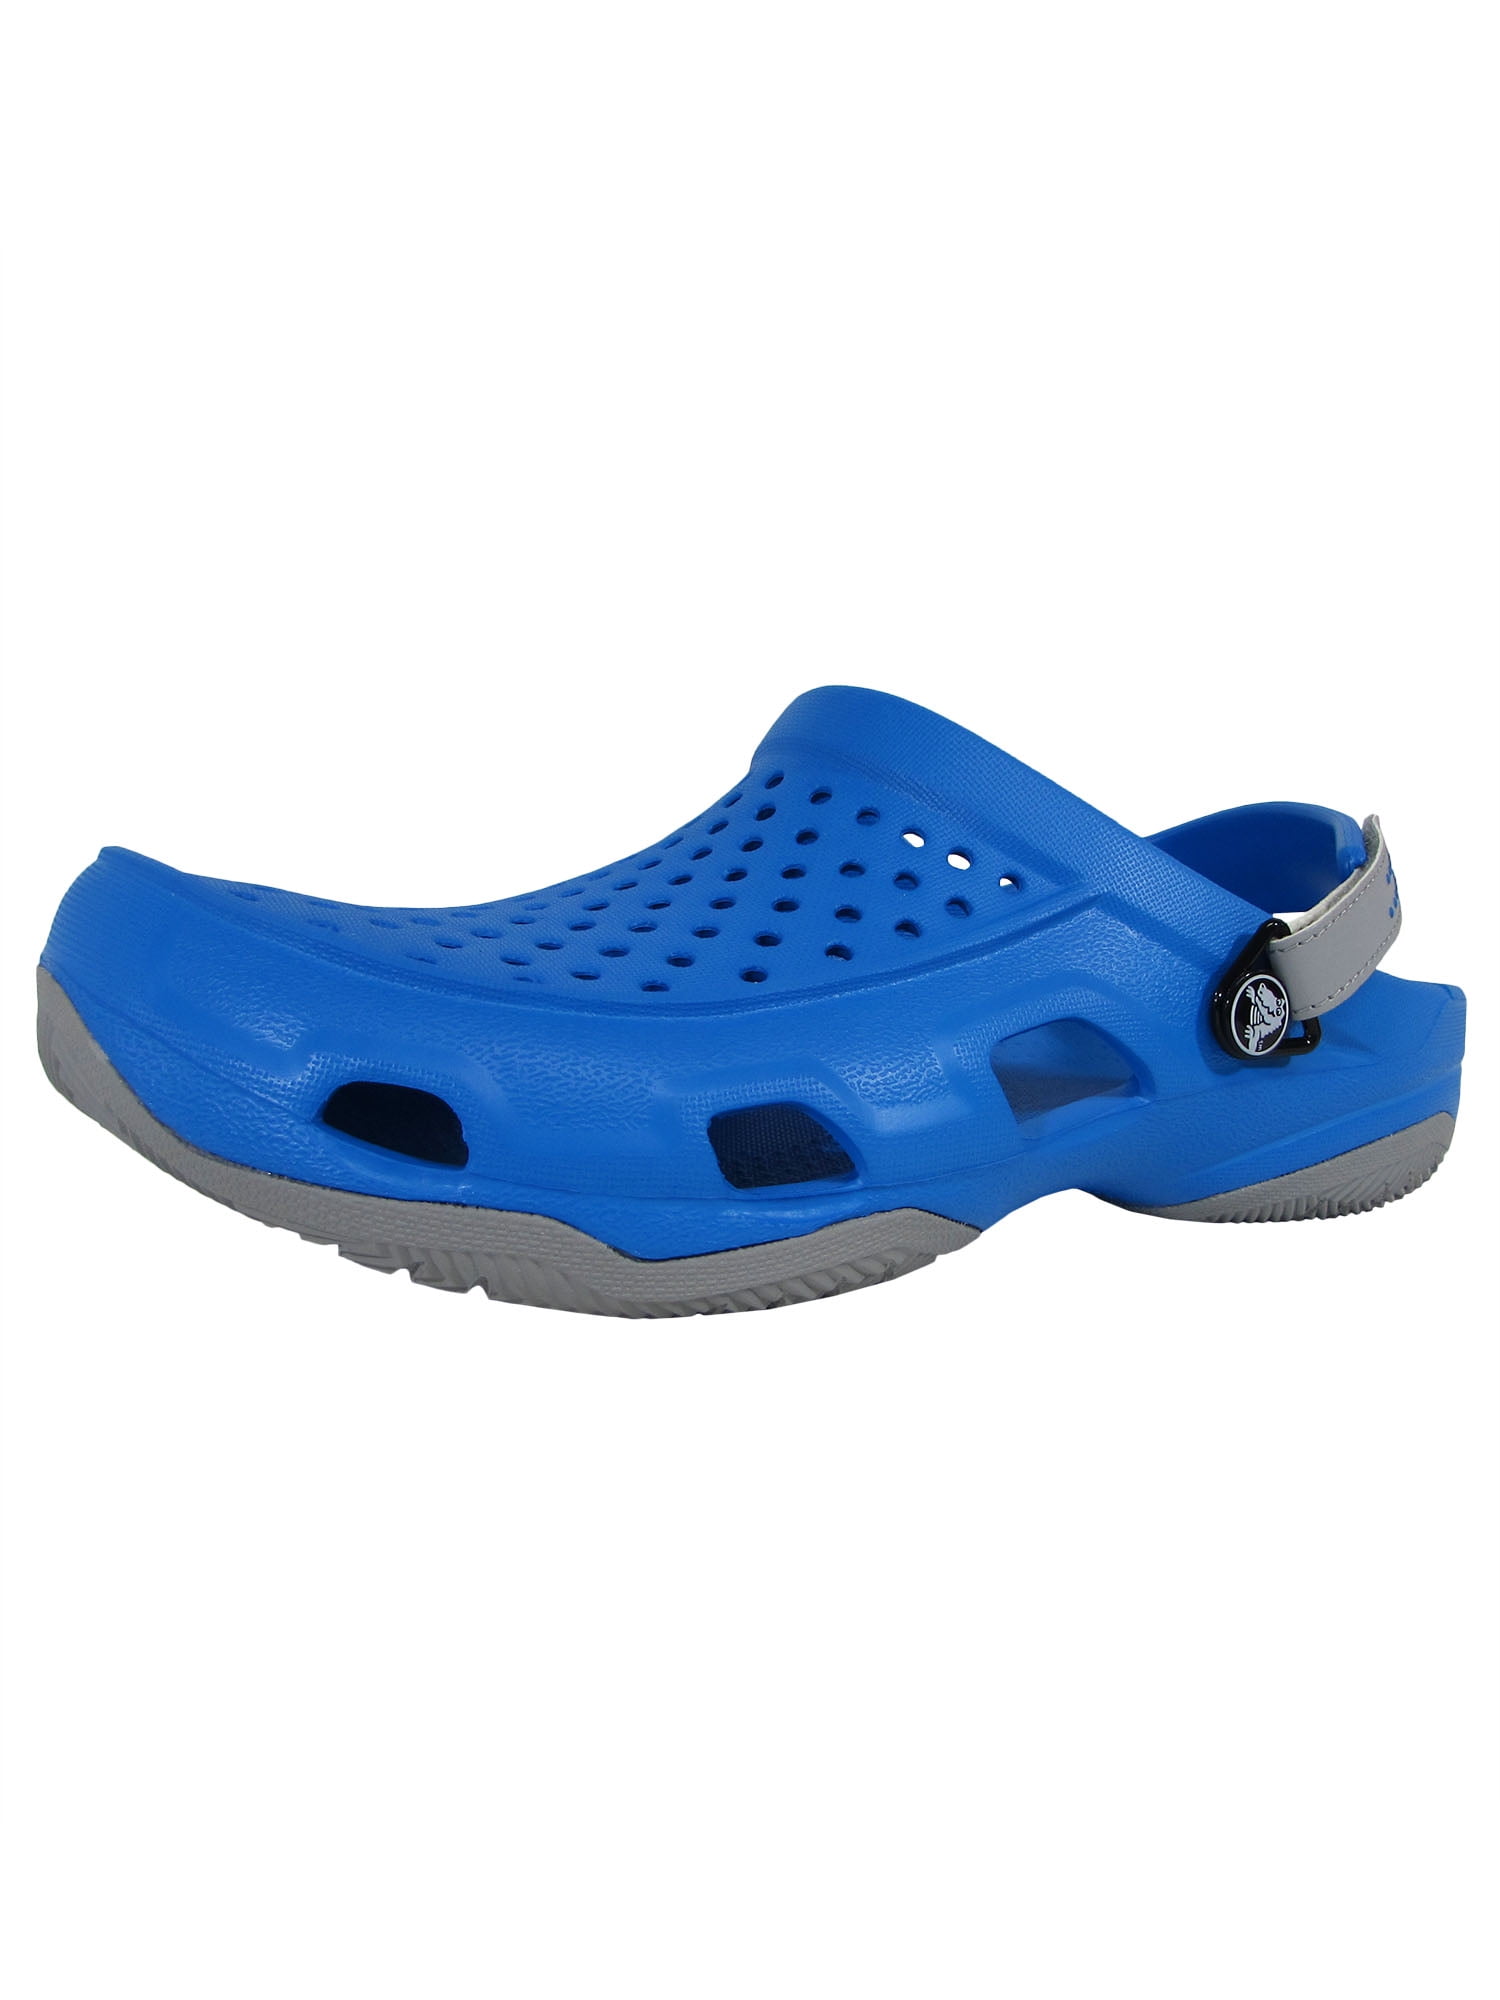 Crocs Swiftwater Deck Roomy Fit Clogs Sandals in Wide Range of Colours 203981